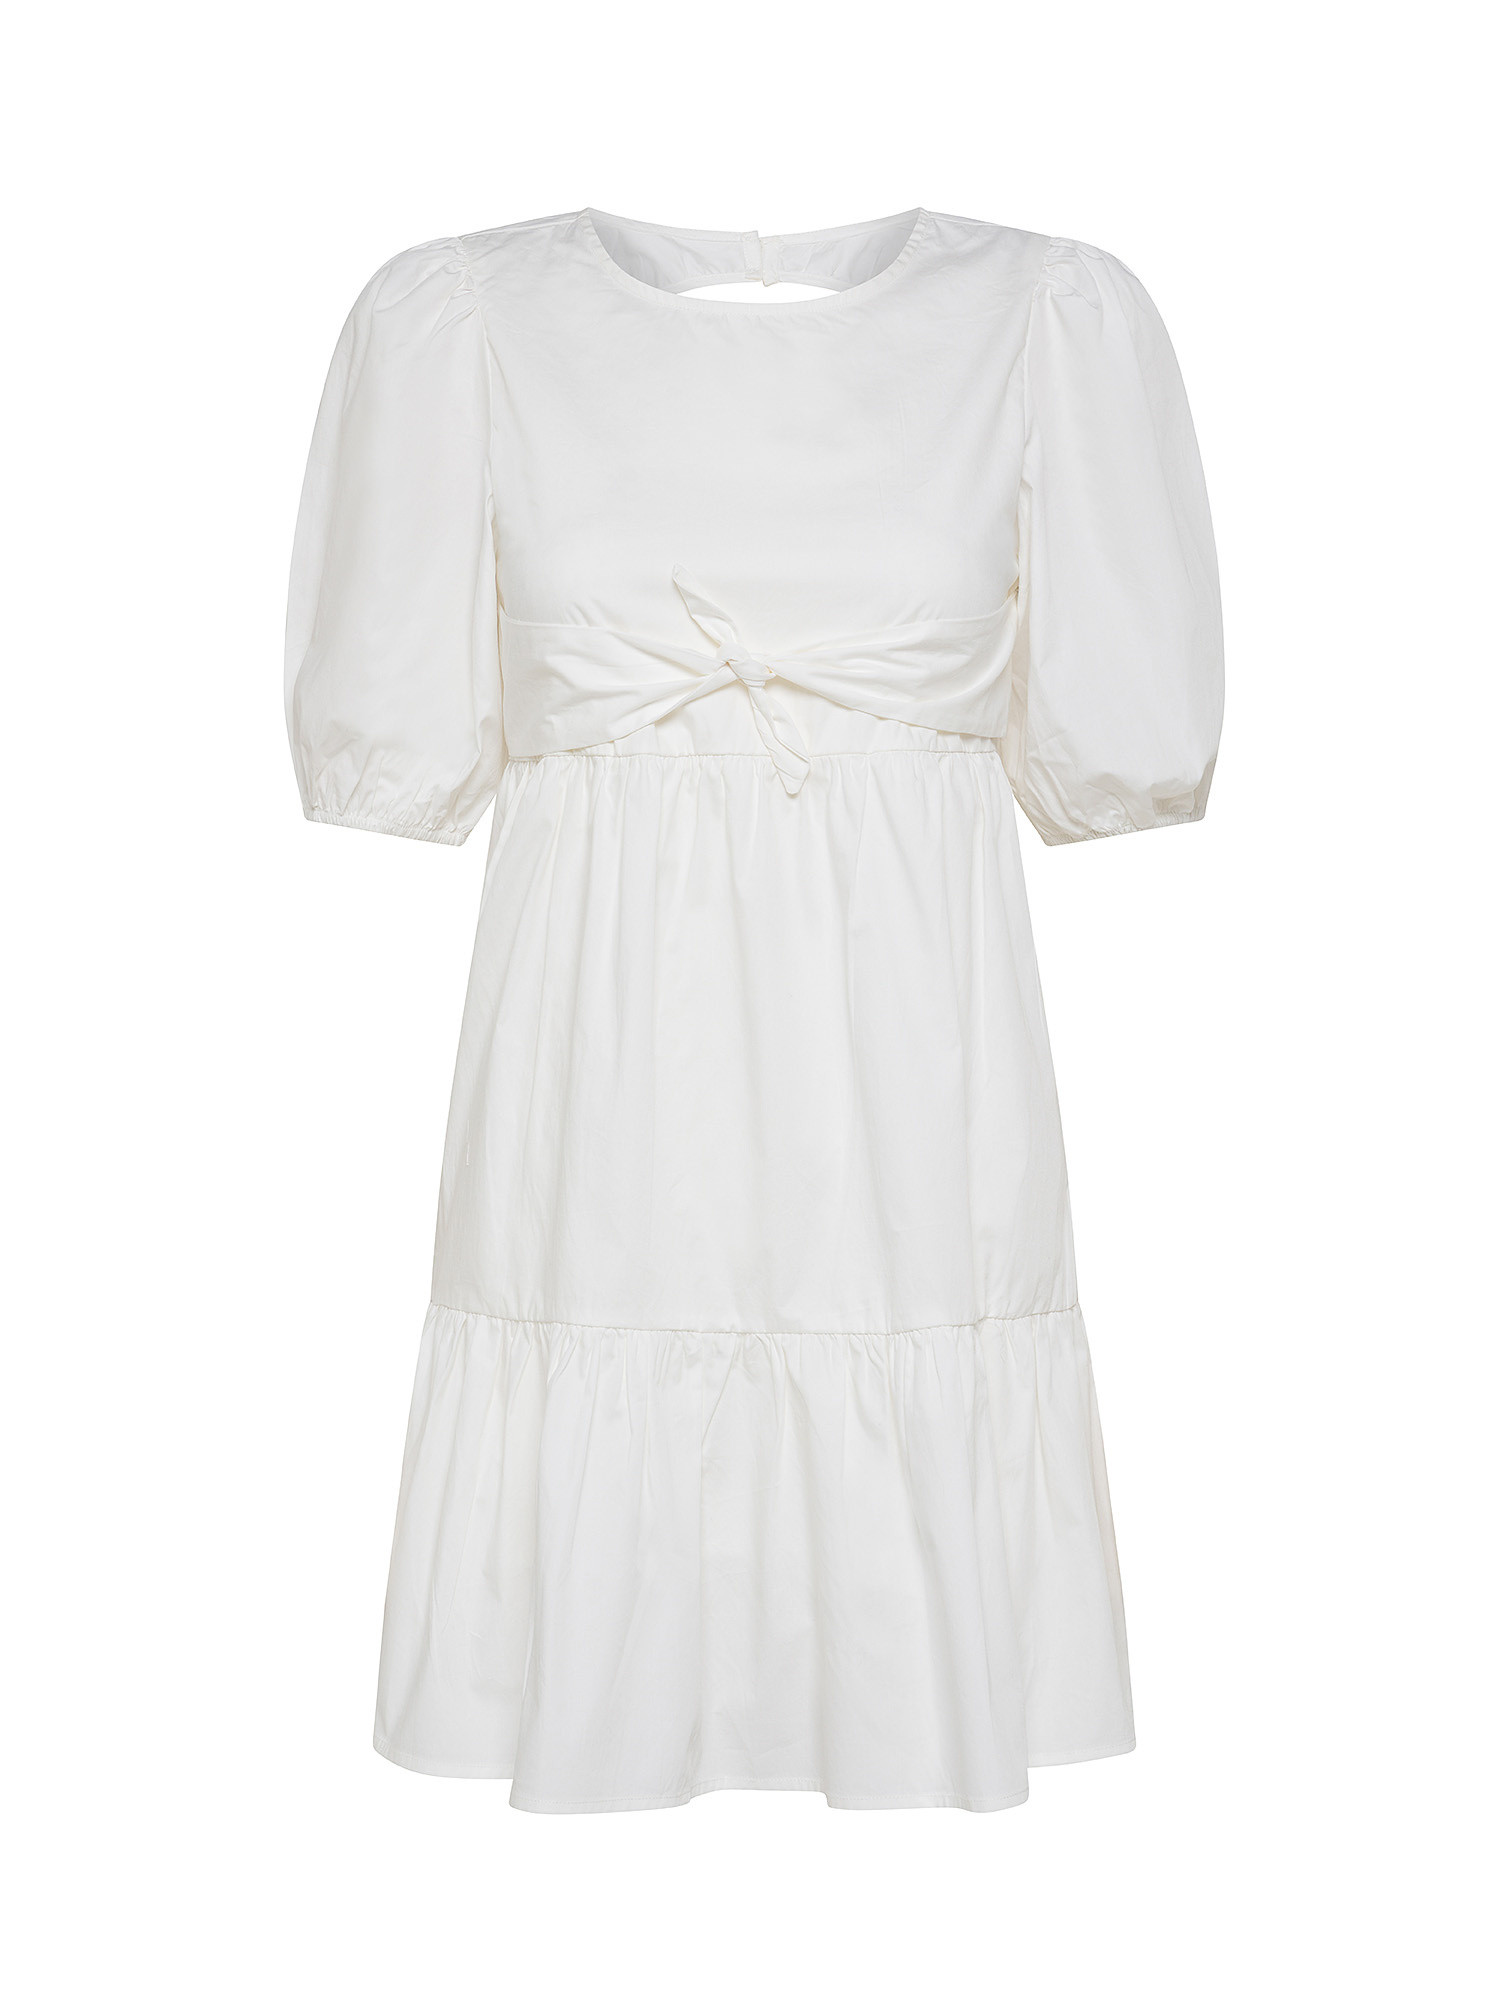 Pepe Jeans - Dress with back neckline in cotton, White, large image number 0